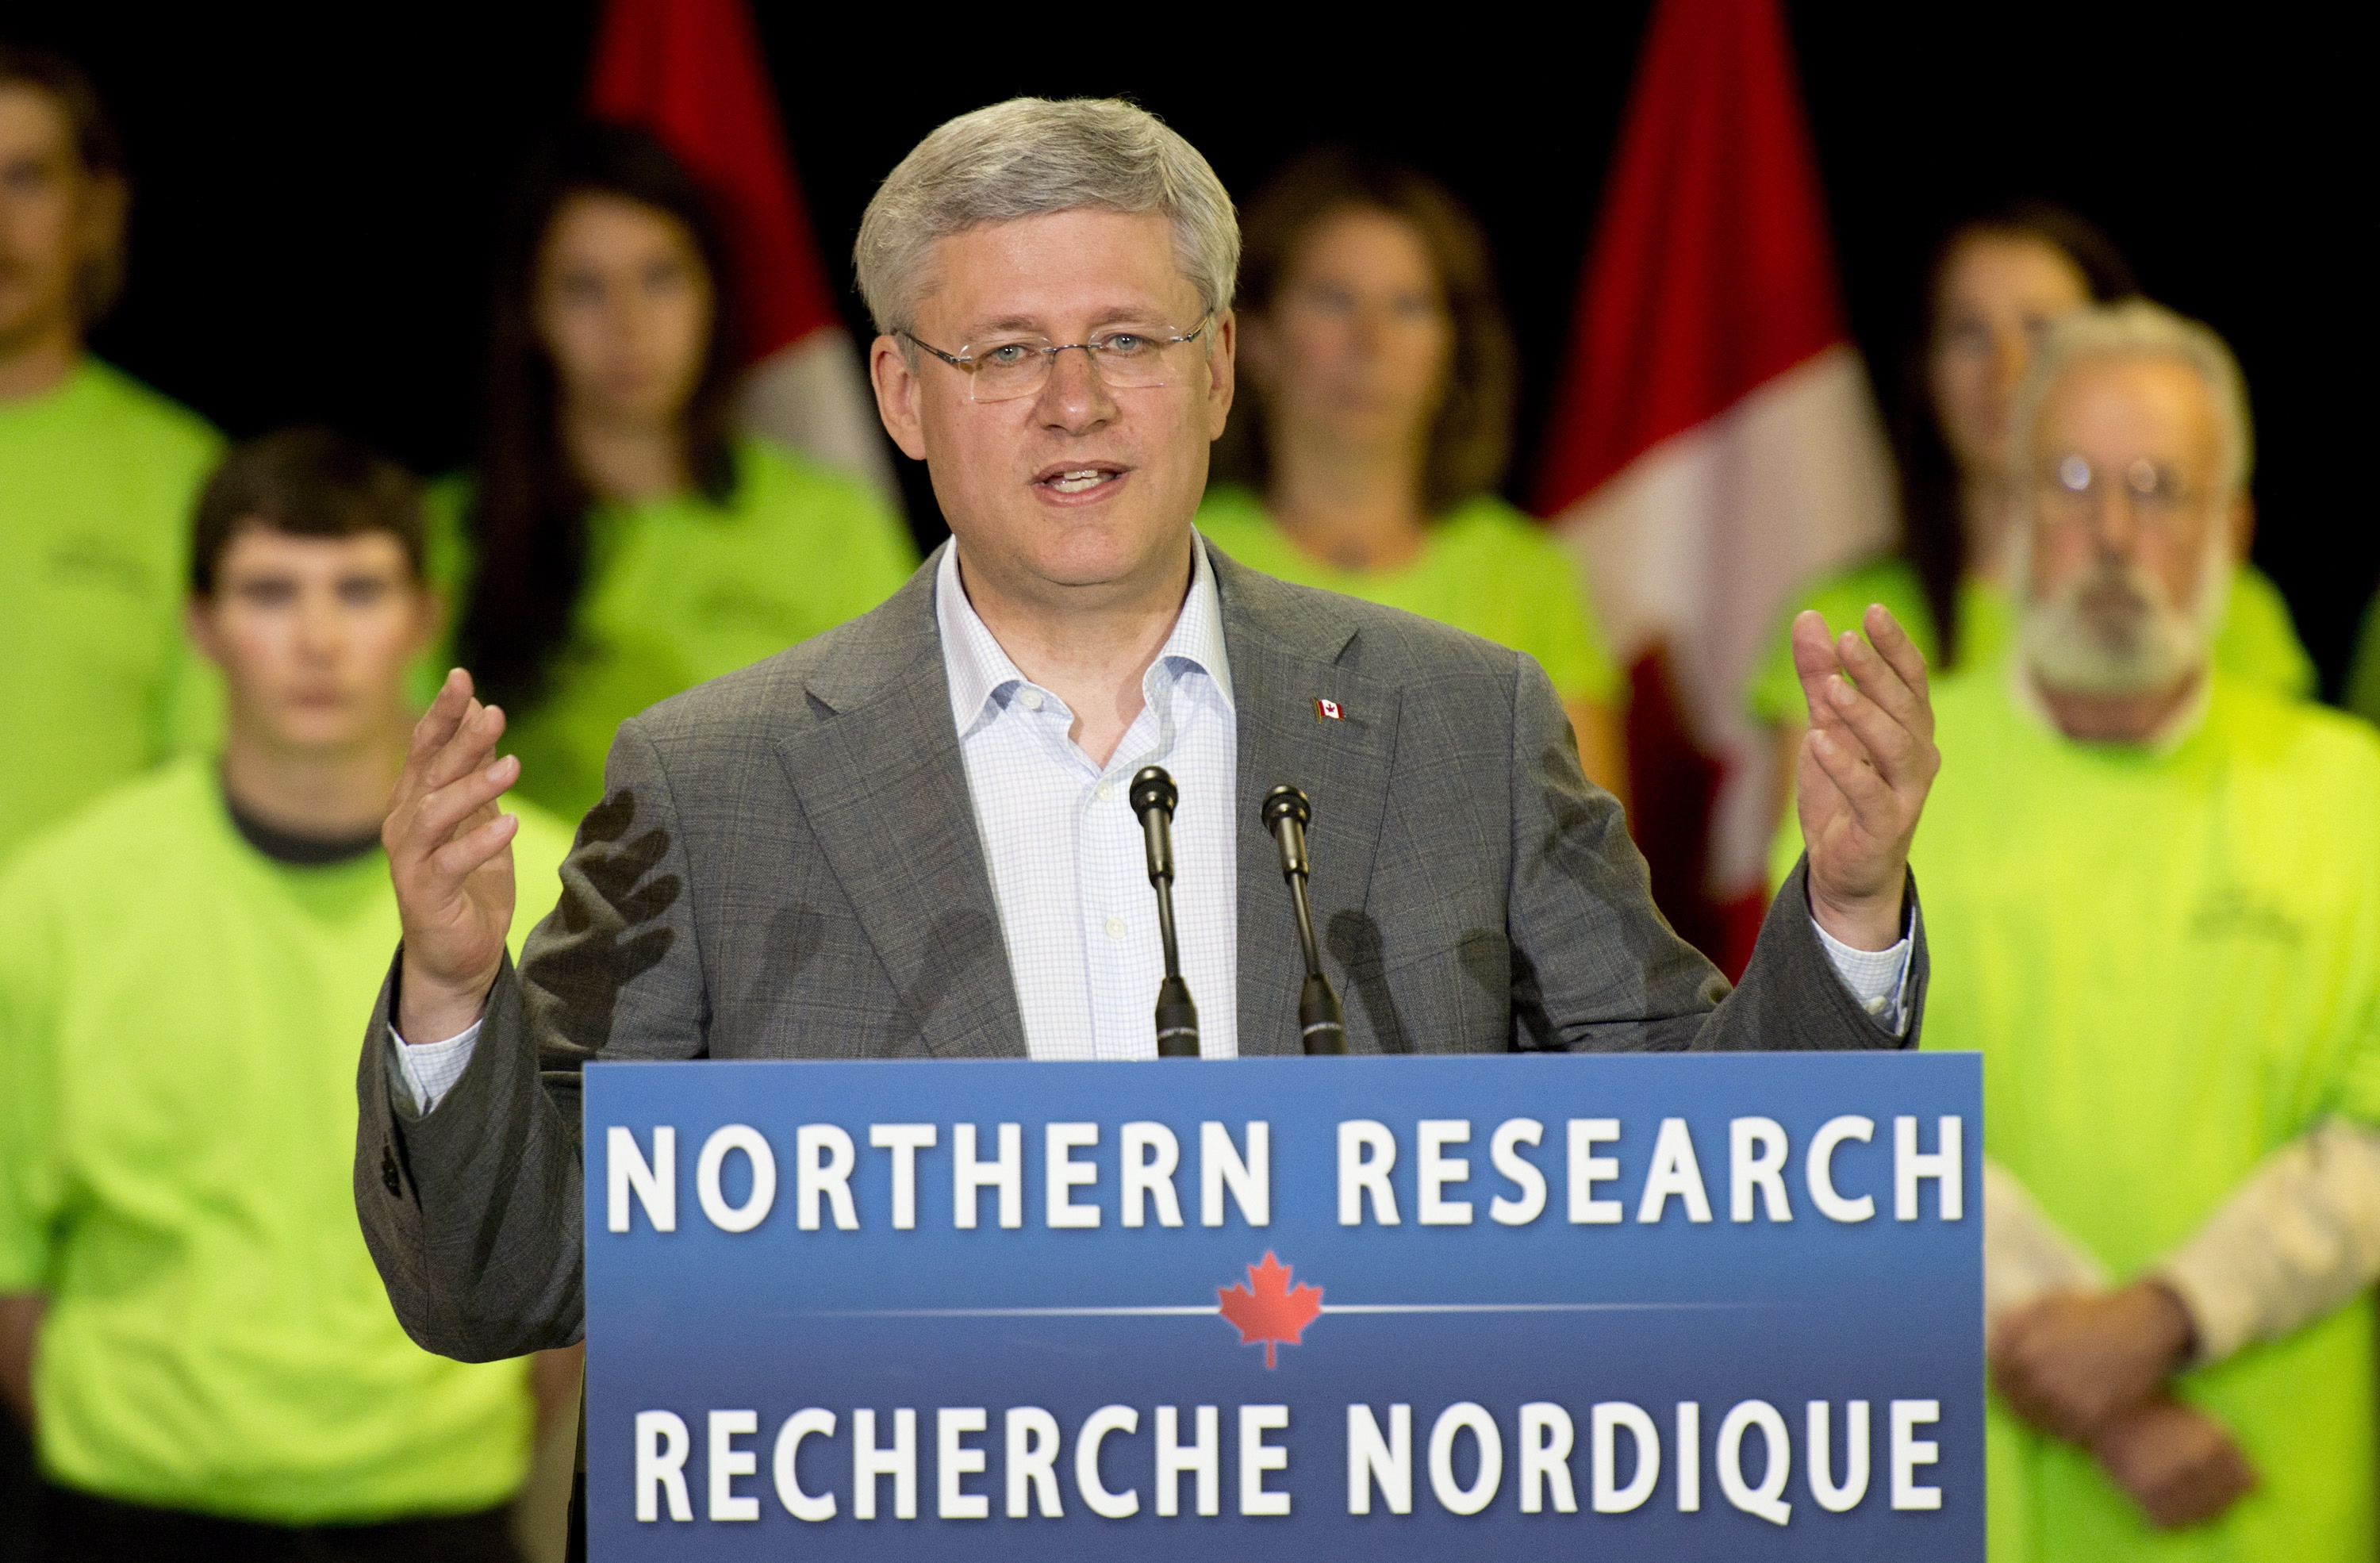 Canadian Prime Minister Stephen Harper responds to questions after making an announcement at the Yukon college in Whitehorse, Thursday August 21, 2014. (Adrian Wyld / The Canadian Press)